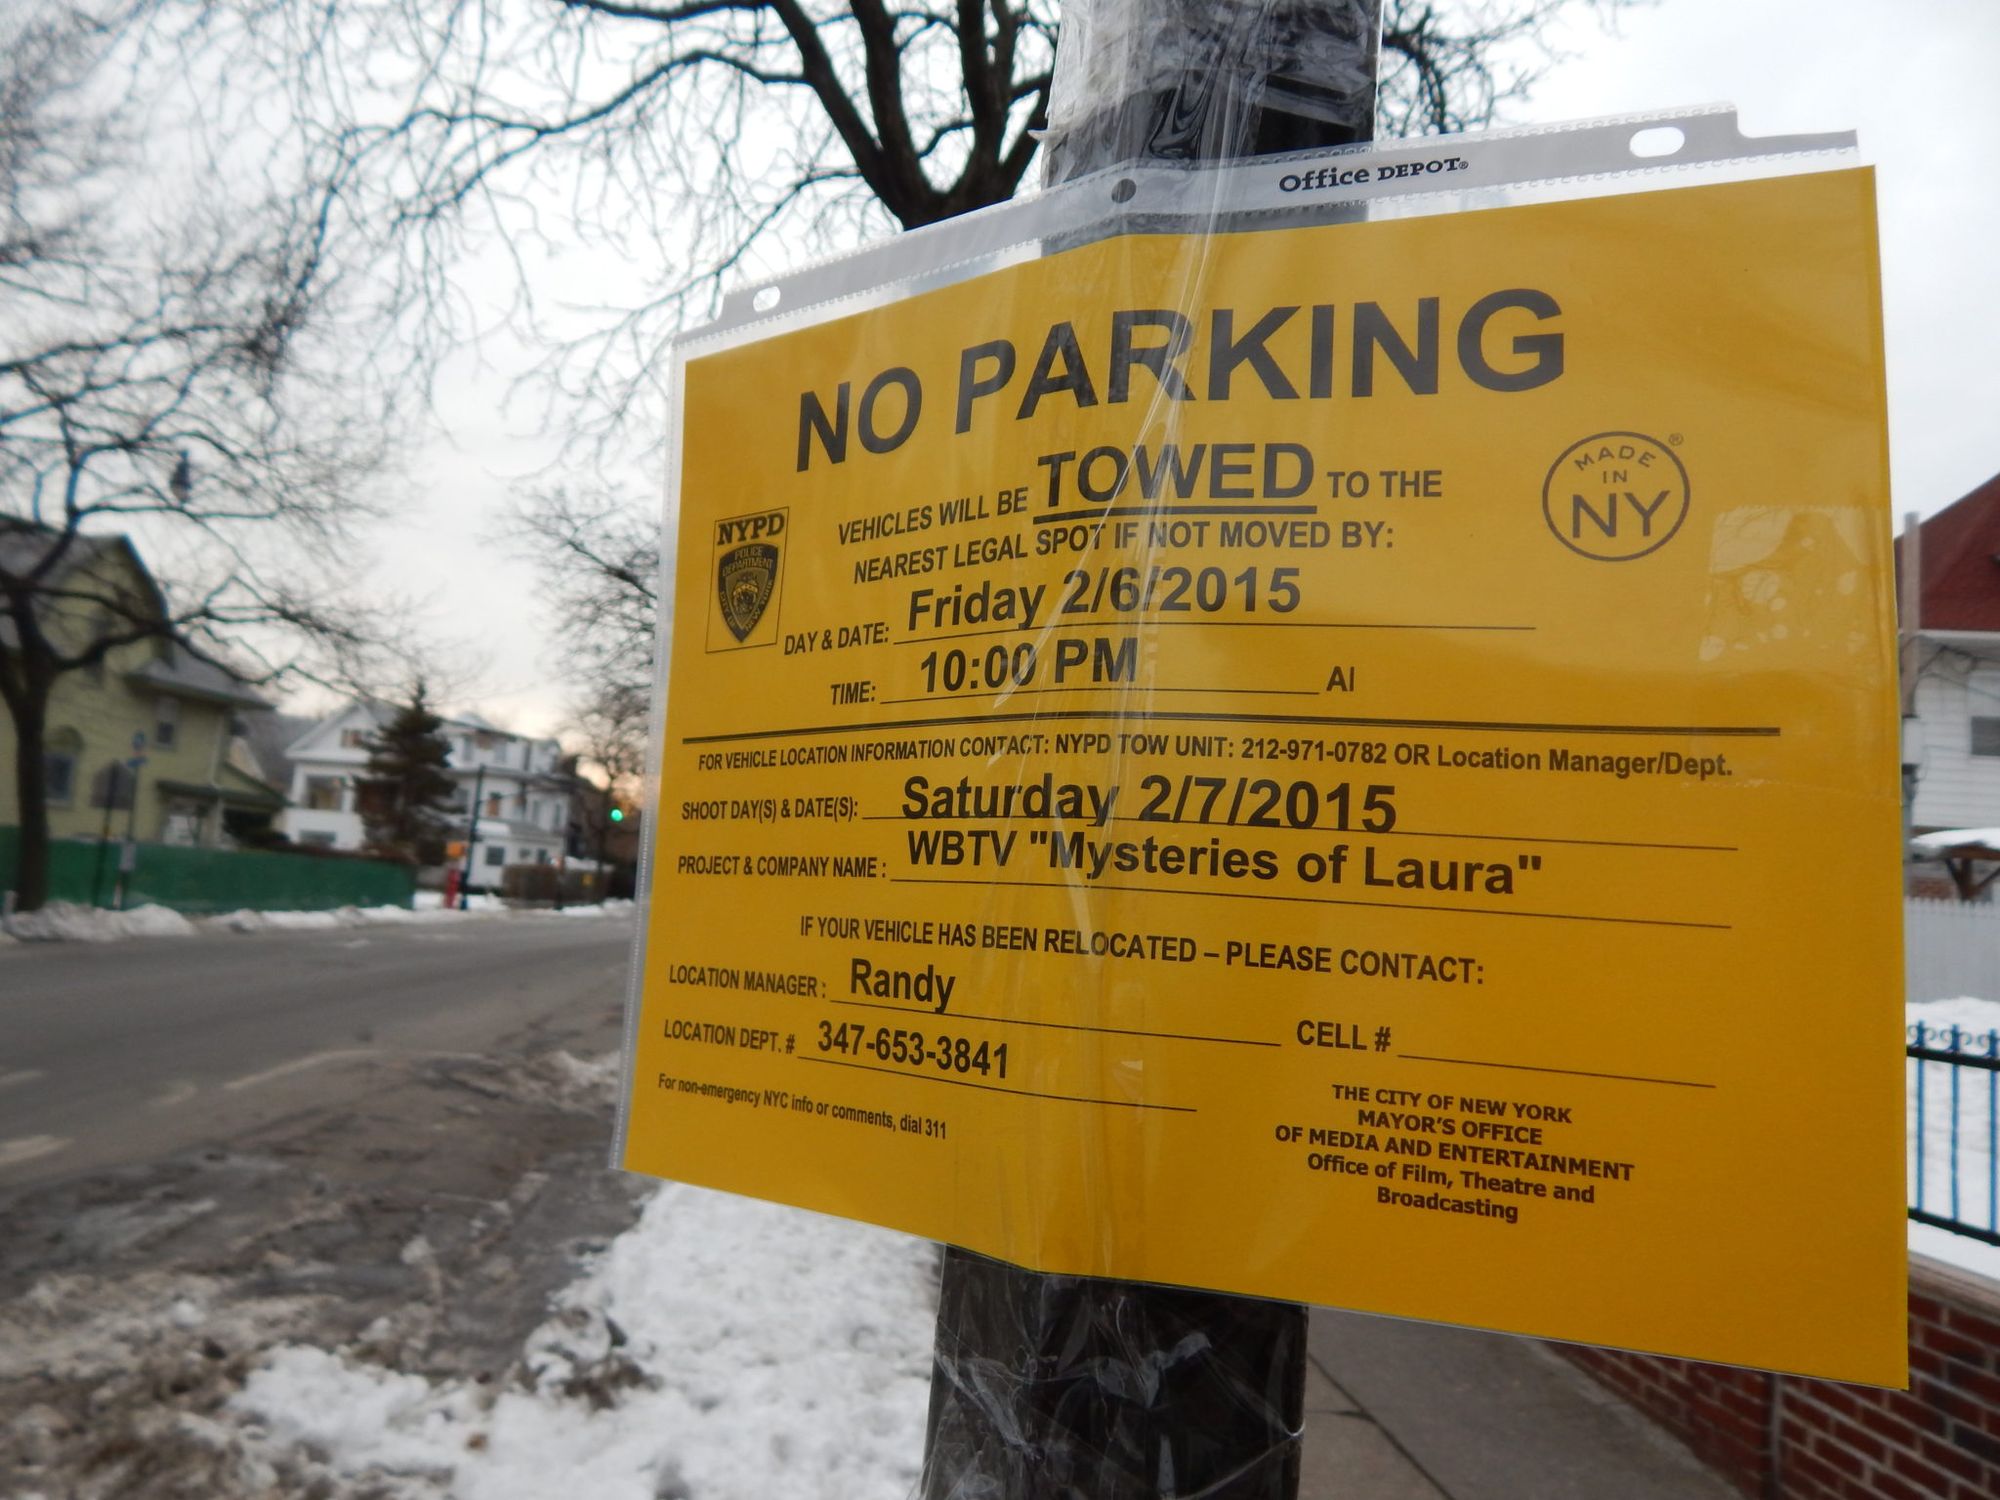 NBC’s ‘The Mysteries of Laura’ Will Film In Our Neighborhood Saturday – Move Your Cars By Friday